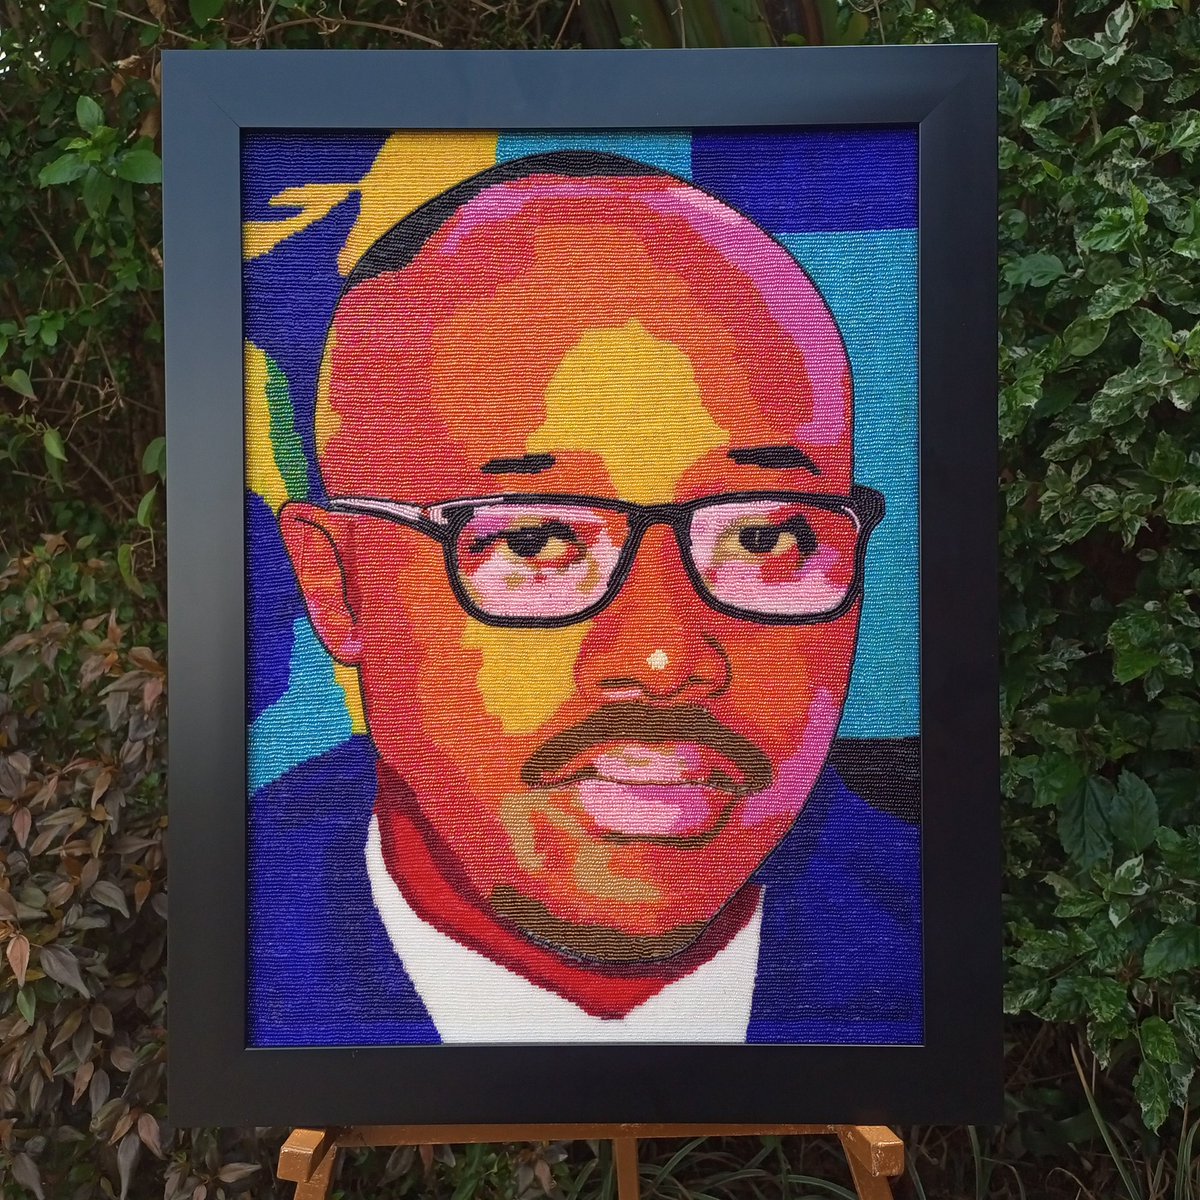 Lord Mayor Pudence Rubingisa, thank U for giving Deaf community the space to celebrate International Deaf Awareness week. We wanted to exhibit this portrait of yours. If interested let us know. Ths for supporting us @PudenceR @CityofKigali #beadwork #RwOT #supportsmallbusiness